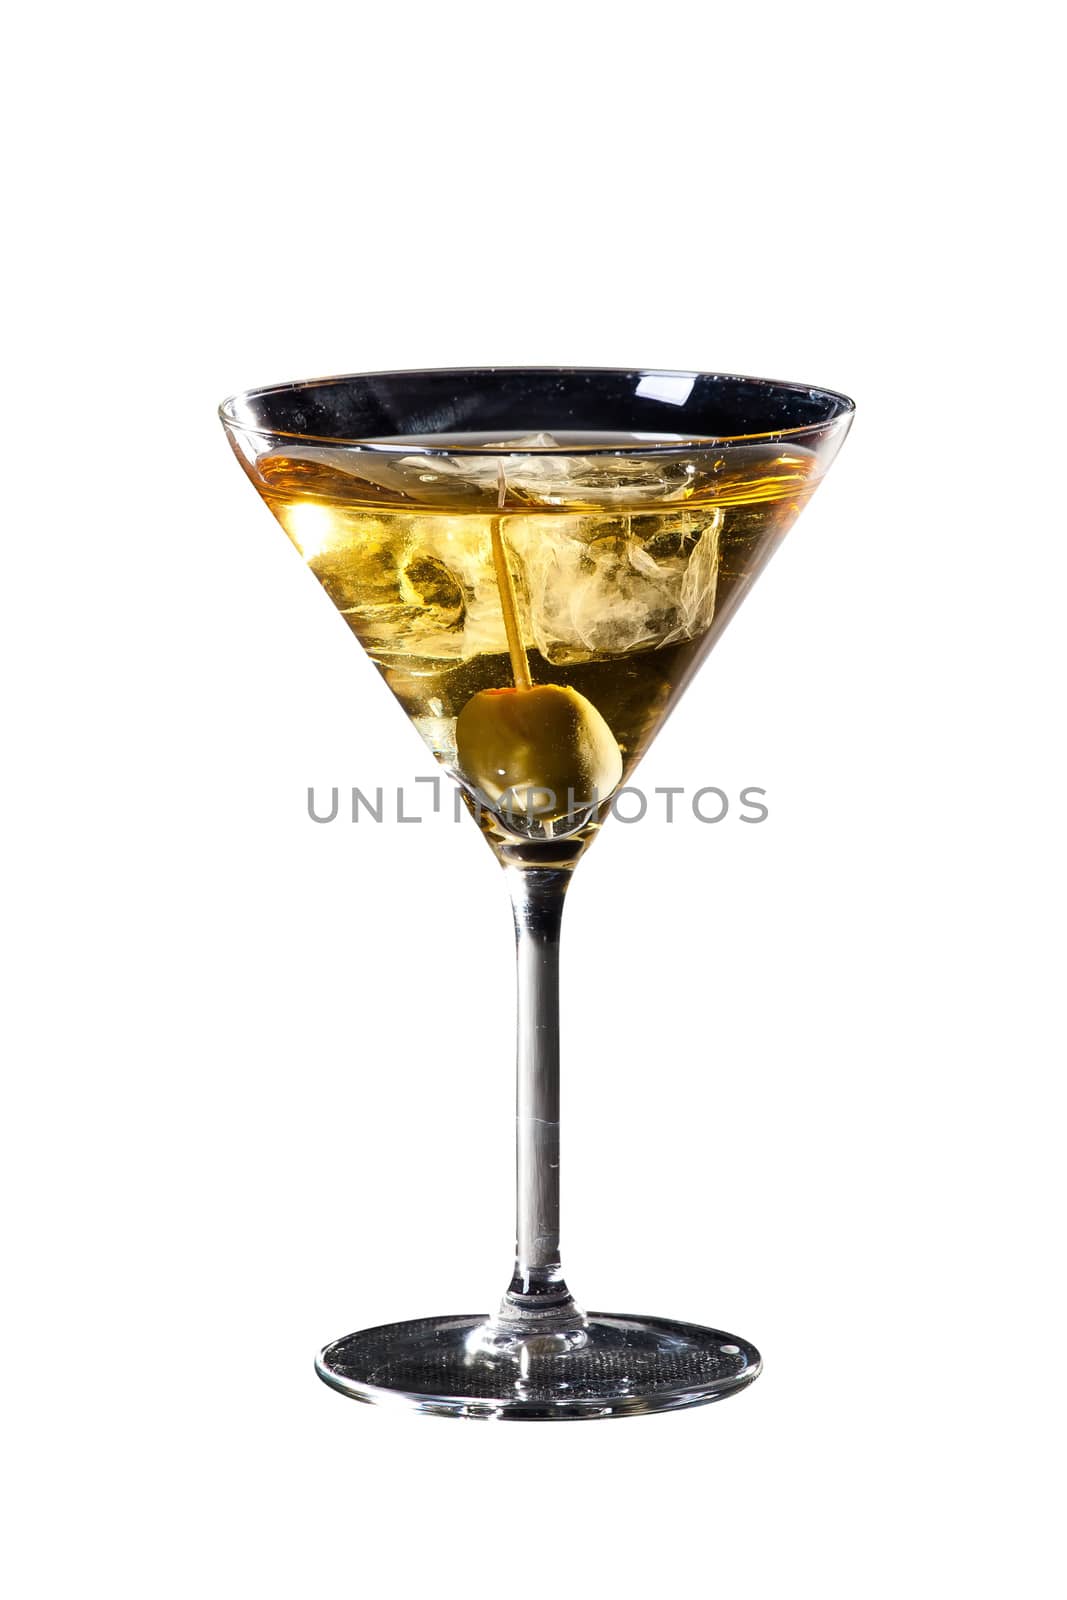 Delicious olive and martini cocktail